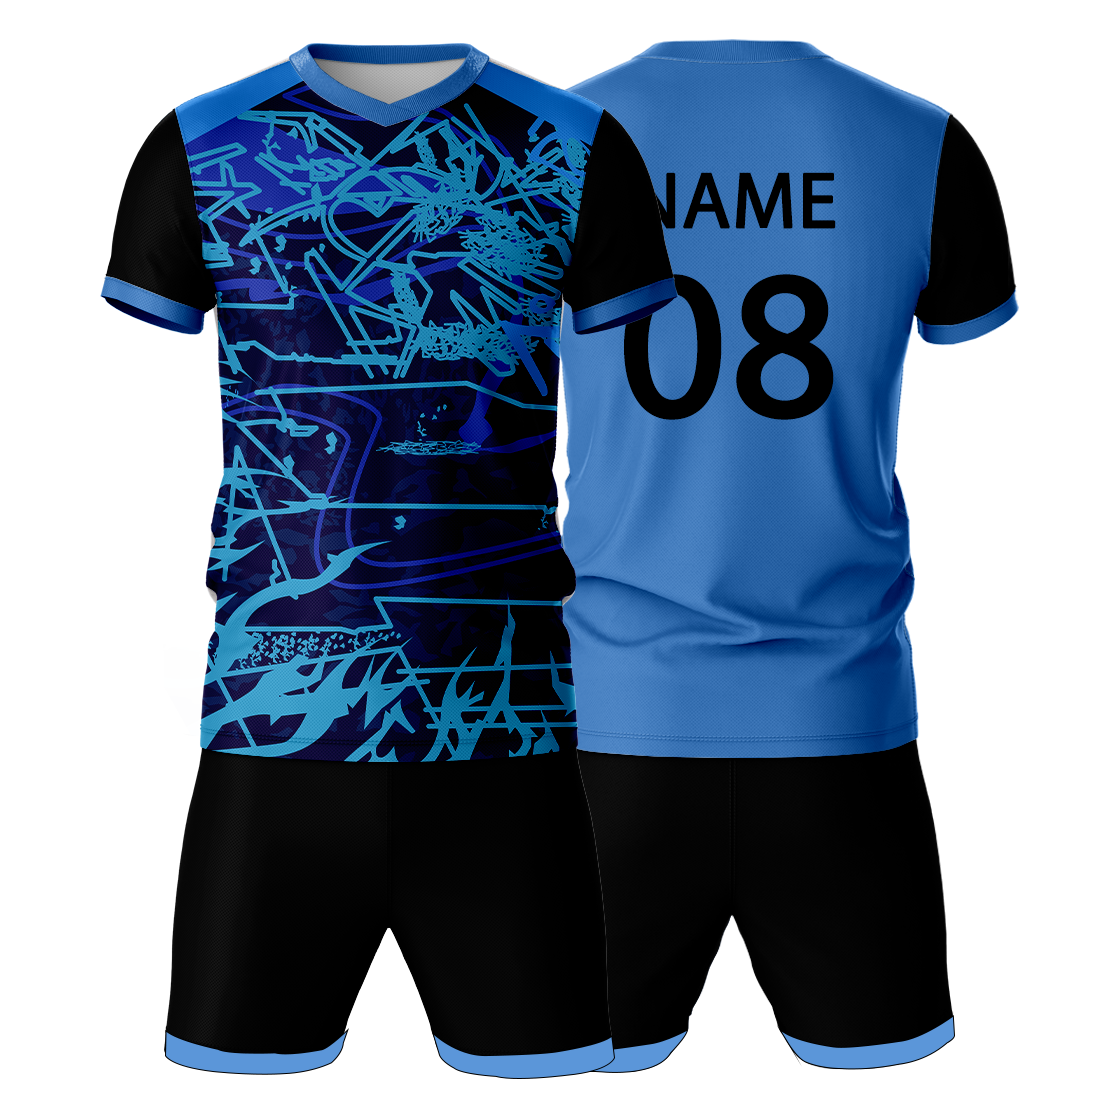 All Over Printed Jersey With Shorts Name & Number Printed.NP50000698